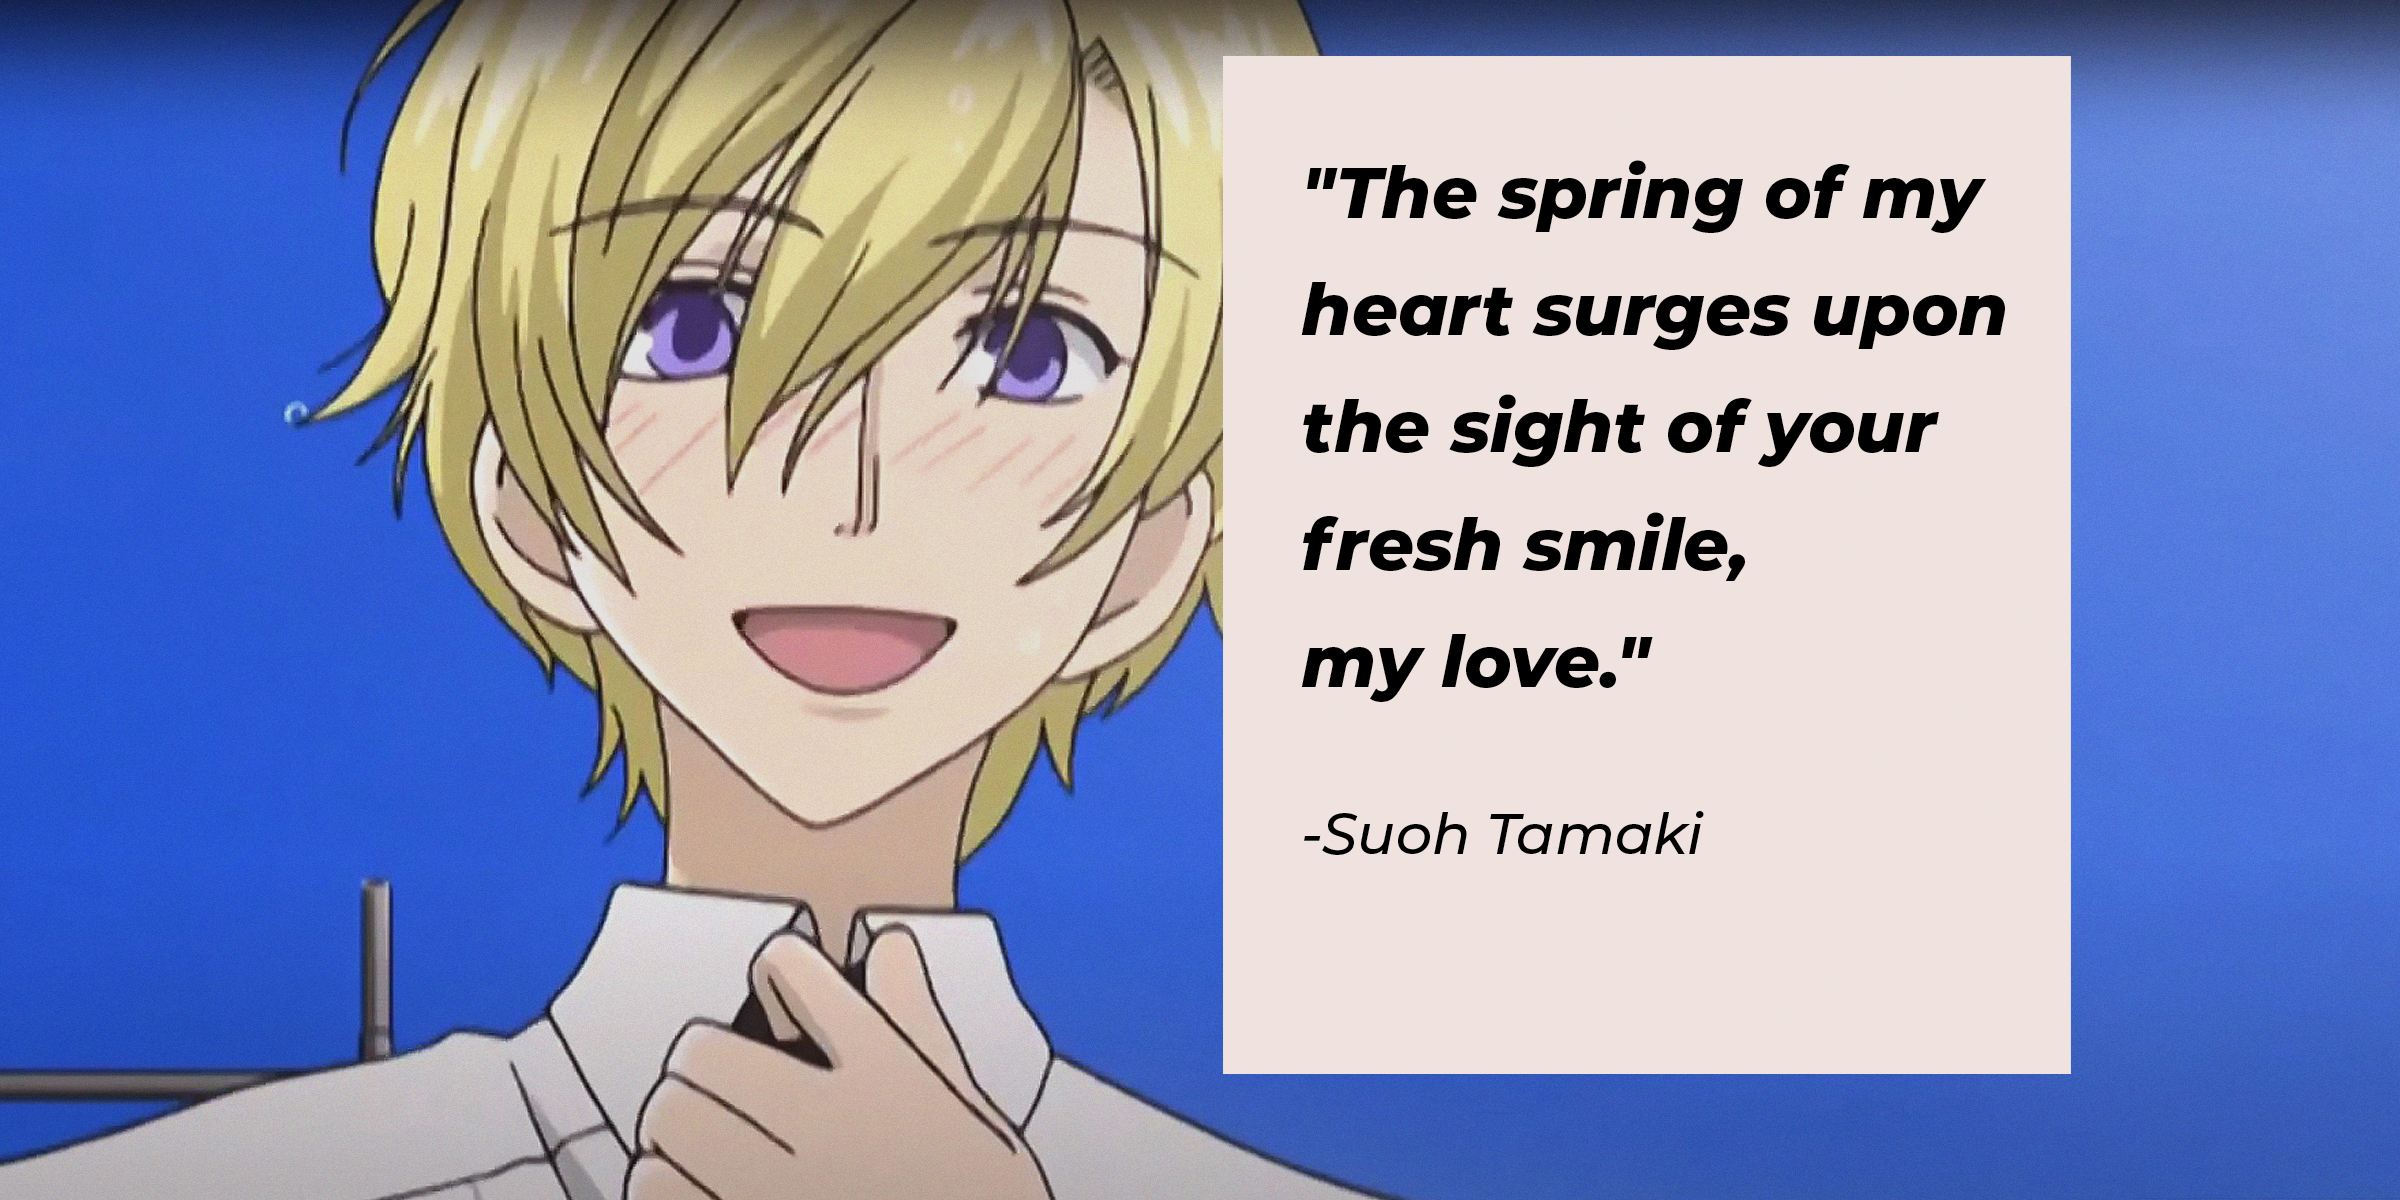 Suoh Tamaki with the character's quote: "The spring of my heart surges upon the sight of your fresh smile, my love." | Source: Facebook.com/theouranhostclub